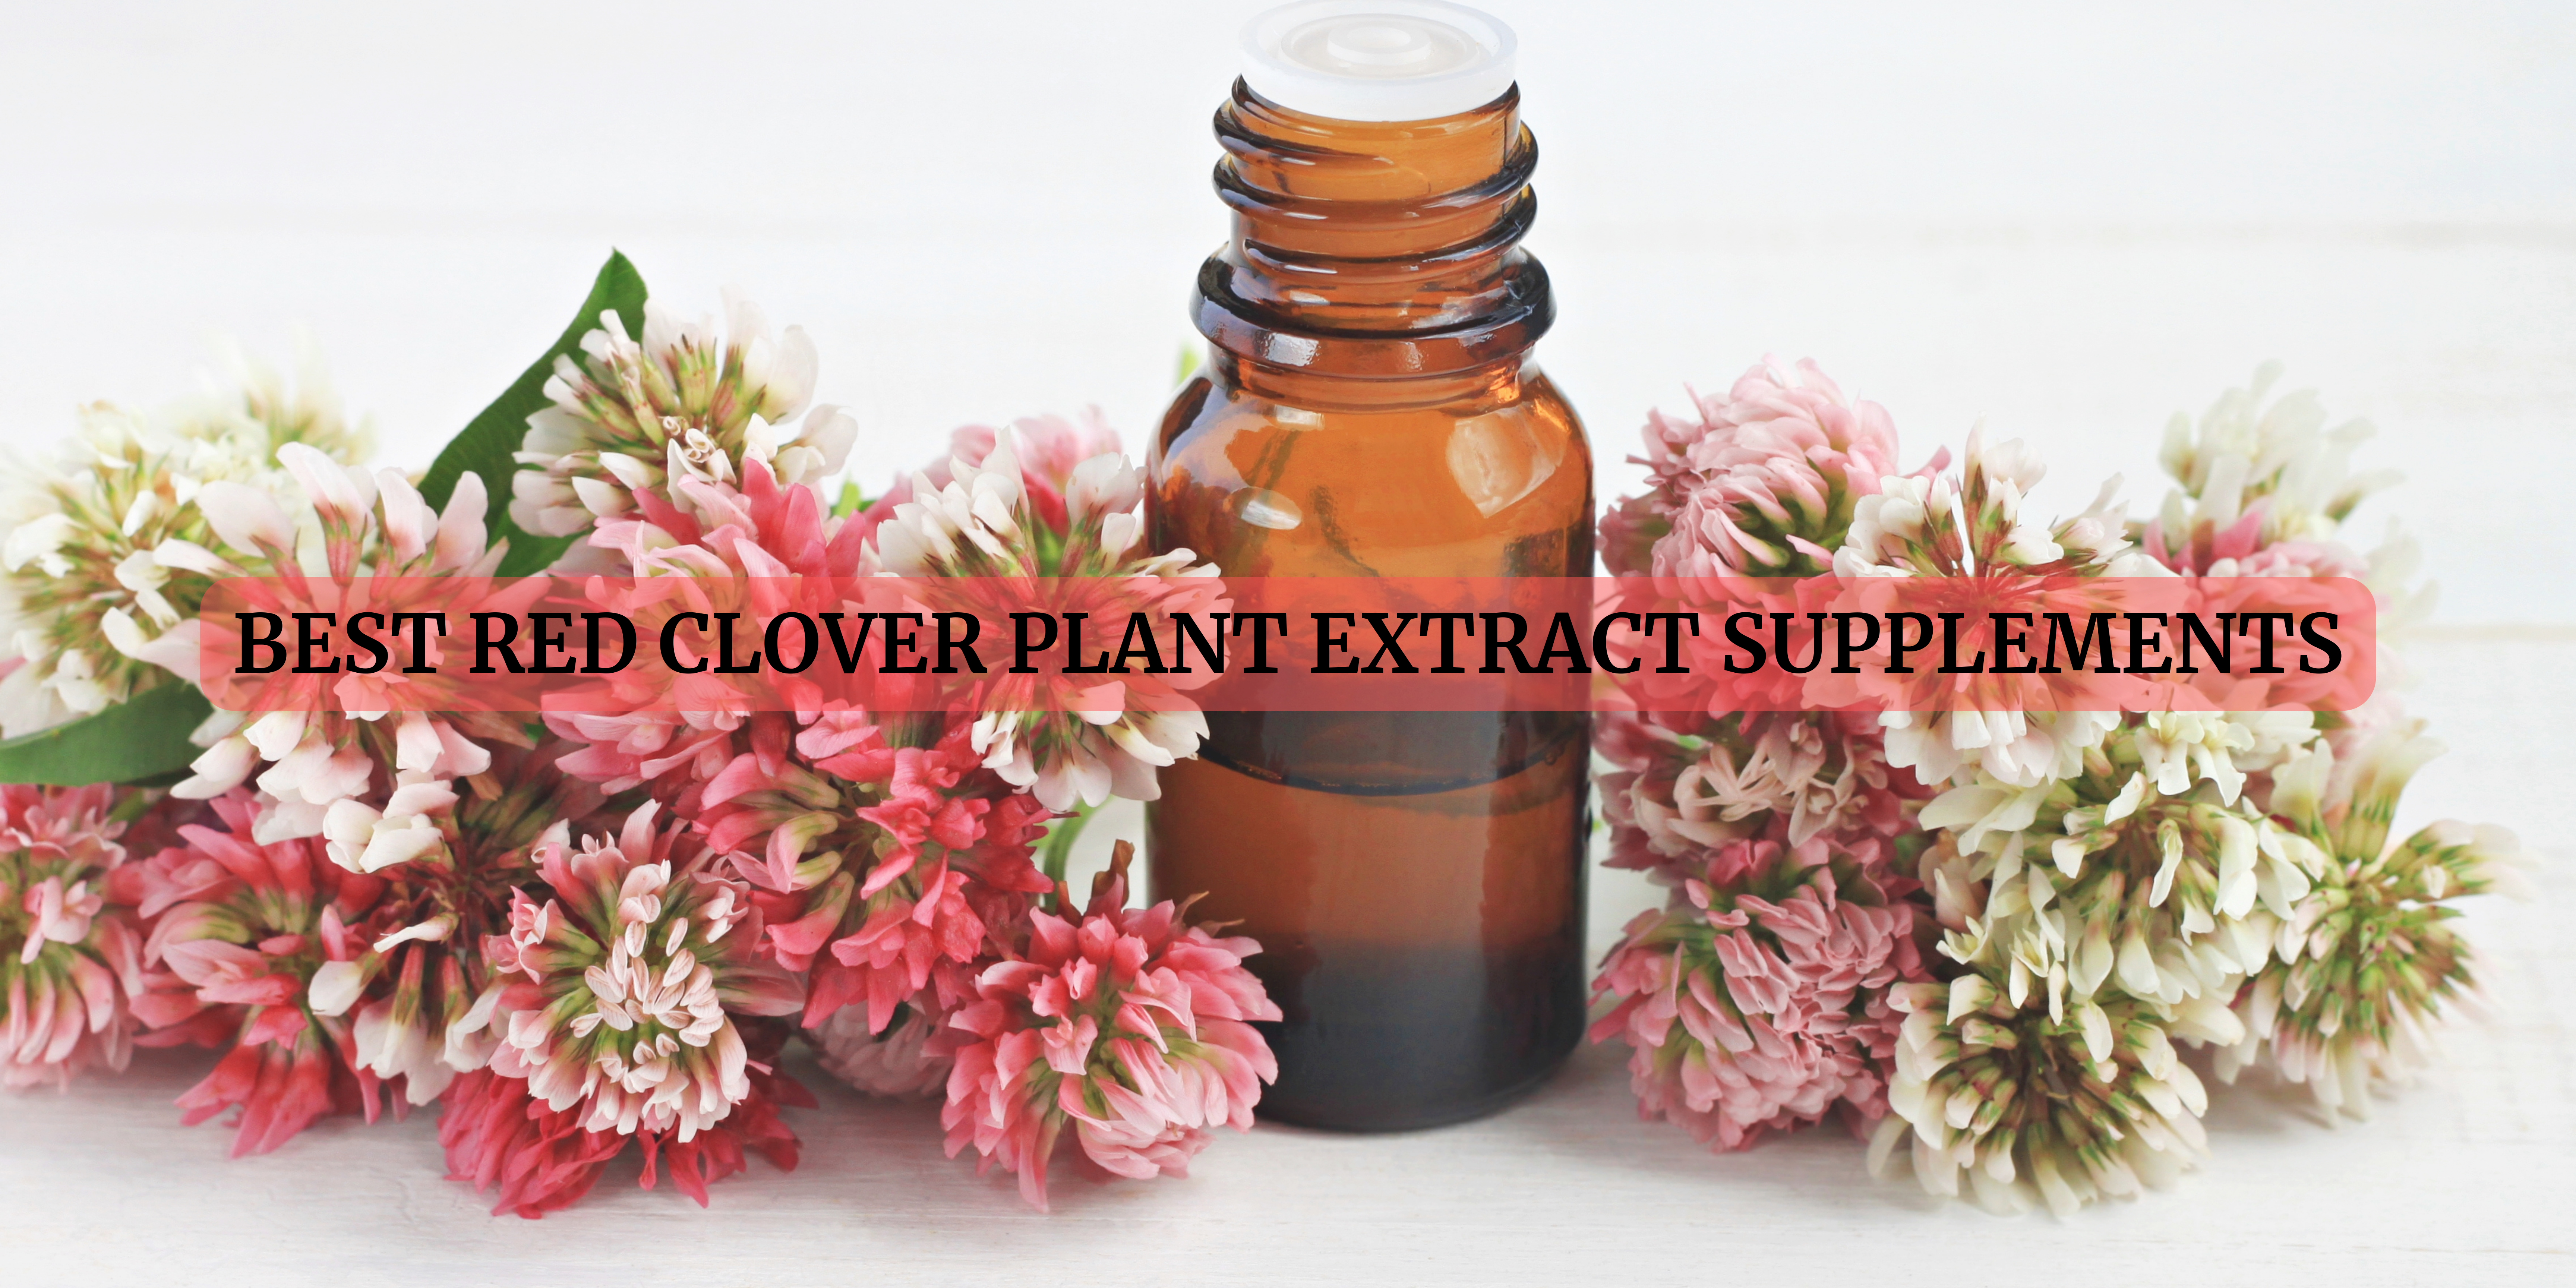 red clover extract supplements in Italy